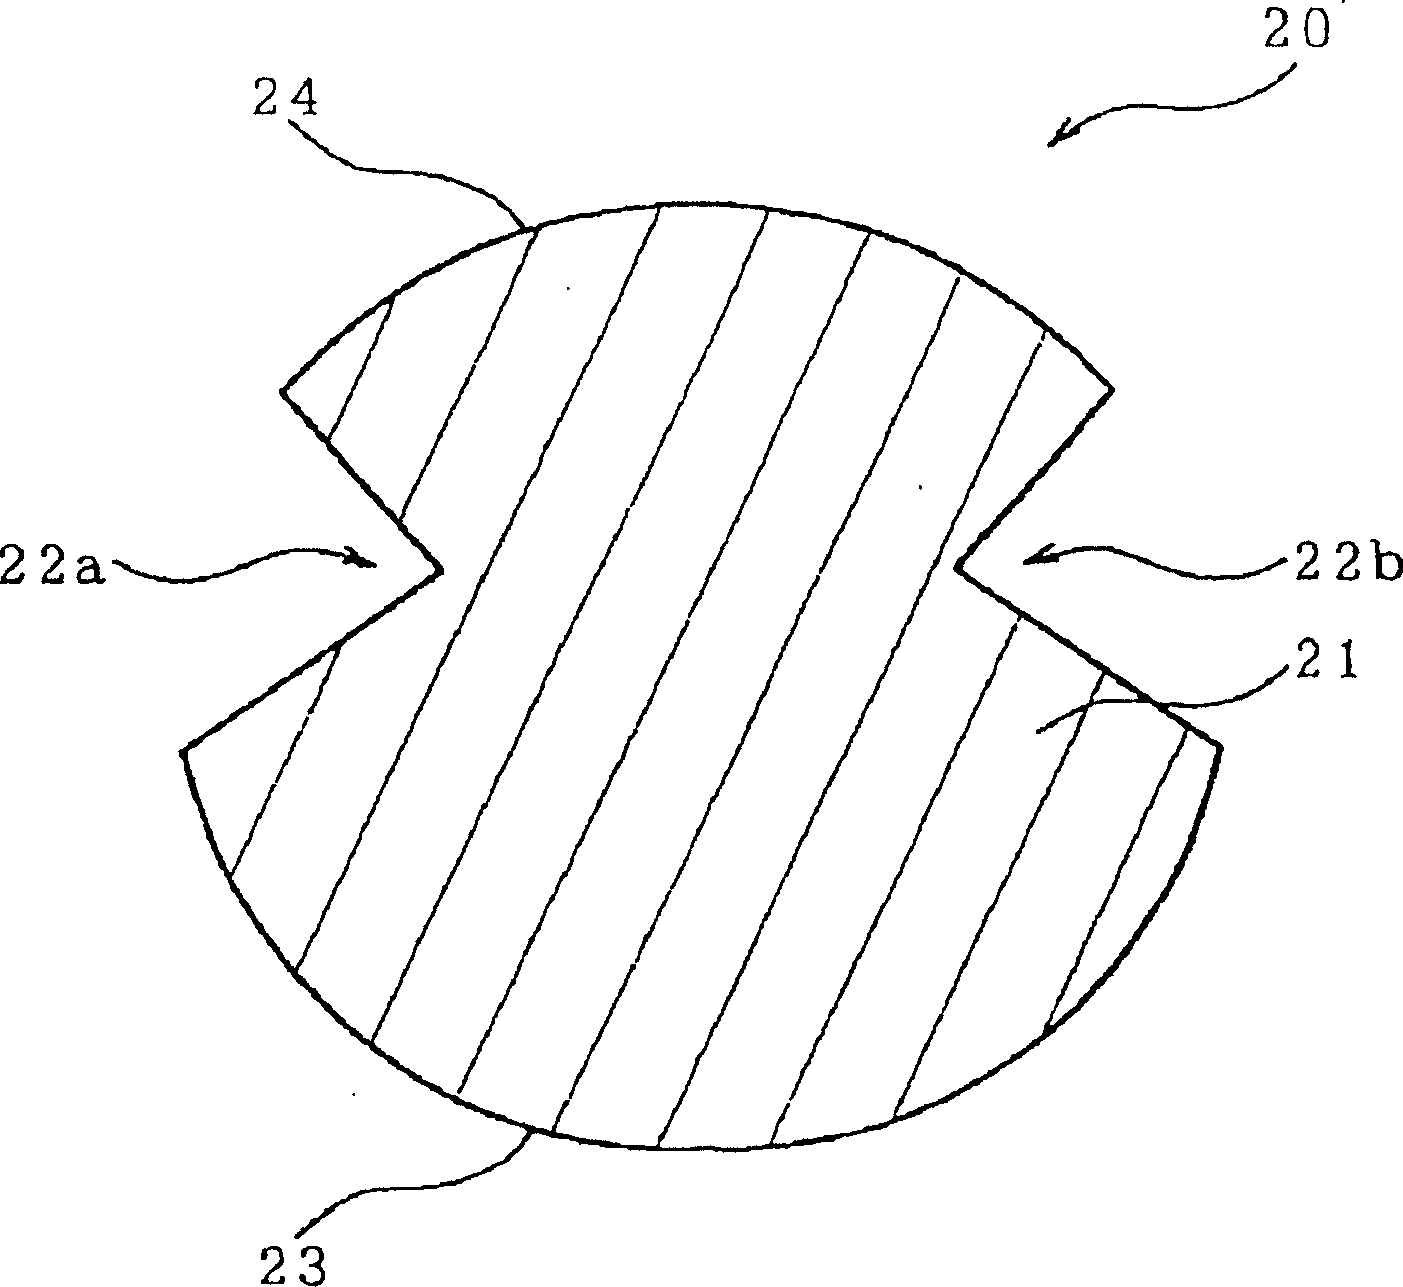 Cu alloy material, method of manufacturing cu alloy conductor using the same, cu alloy conductor obtained by the method, and cable or trolley wire using the cu alloy conductor